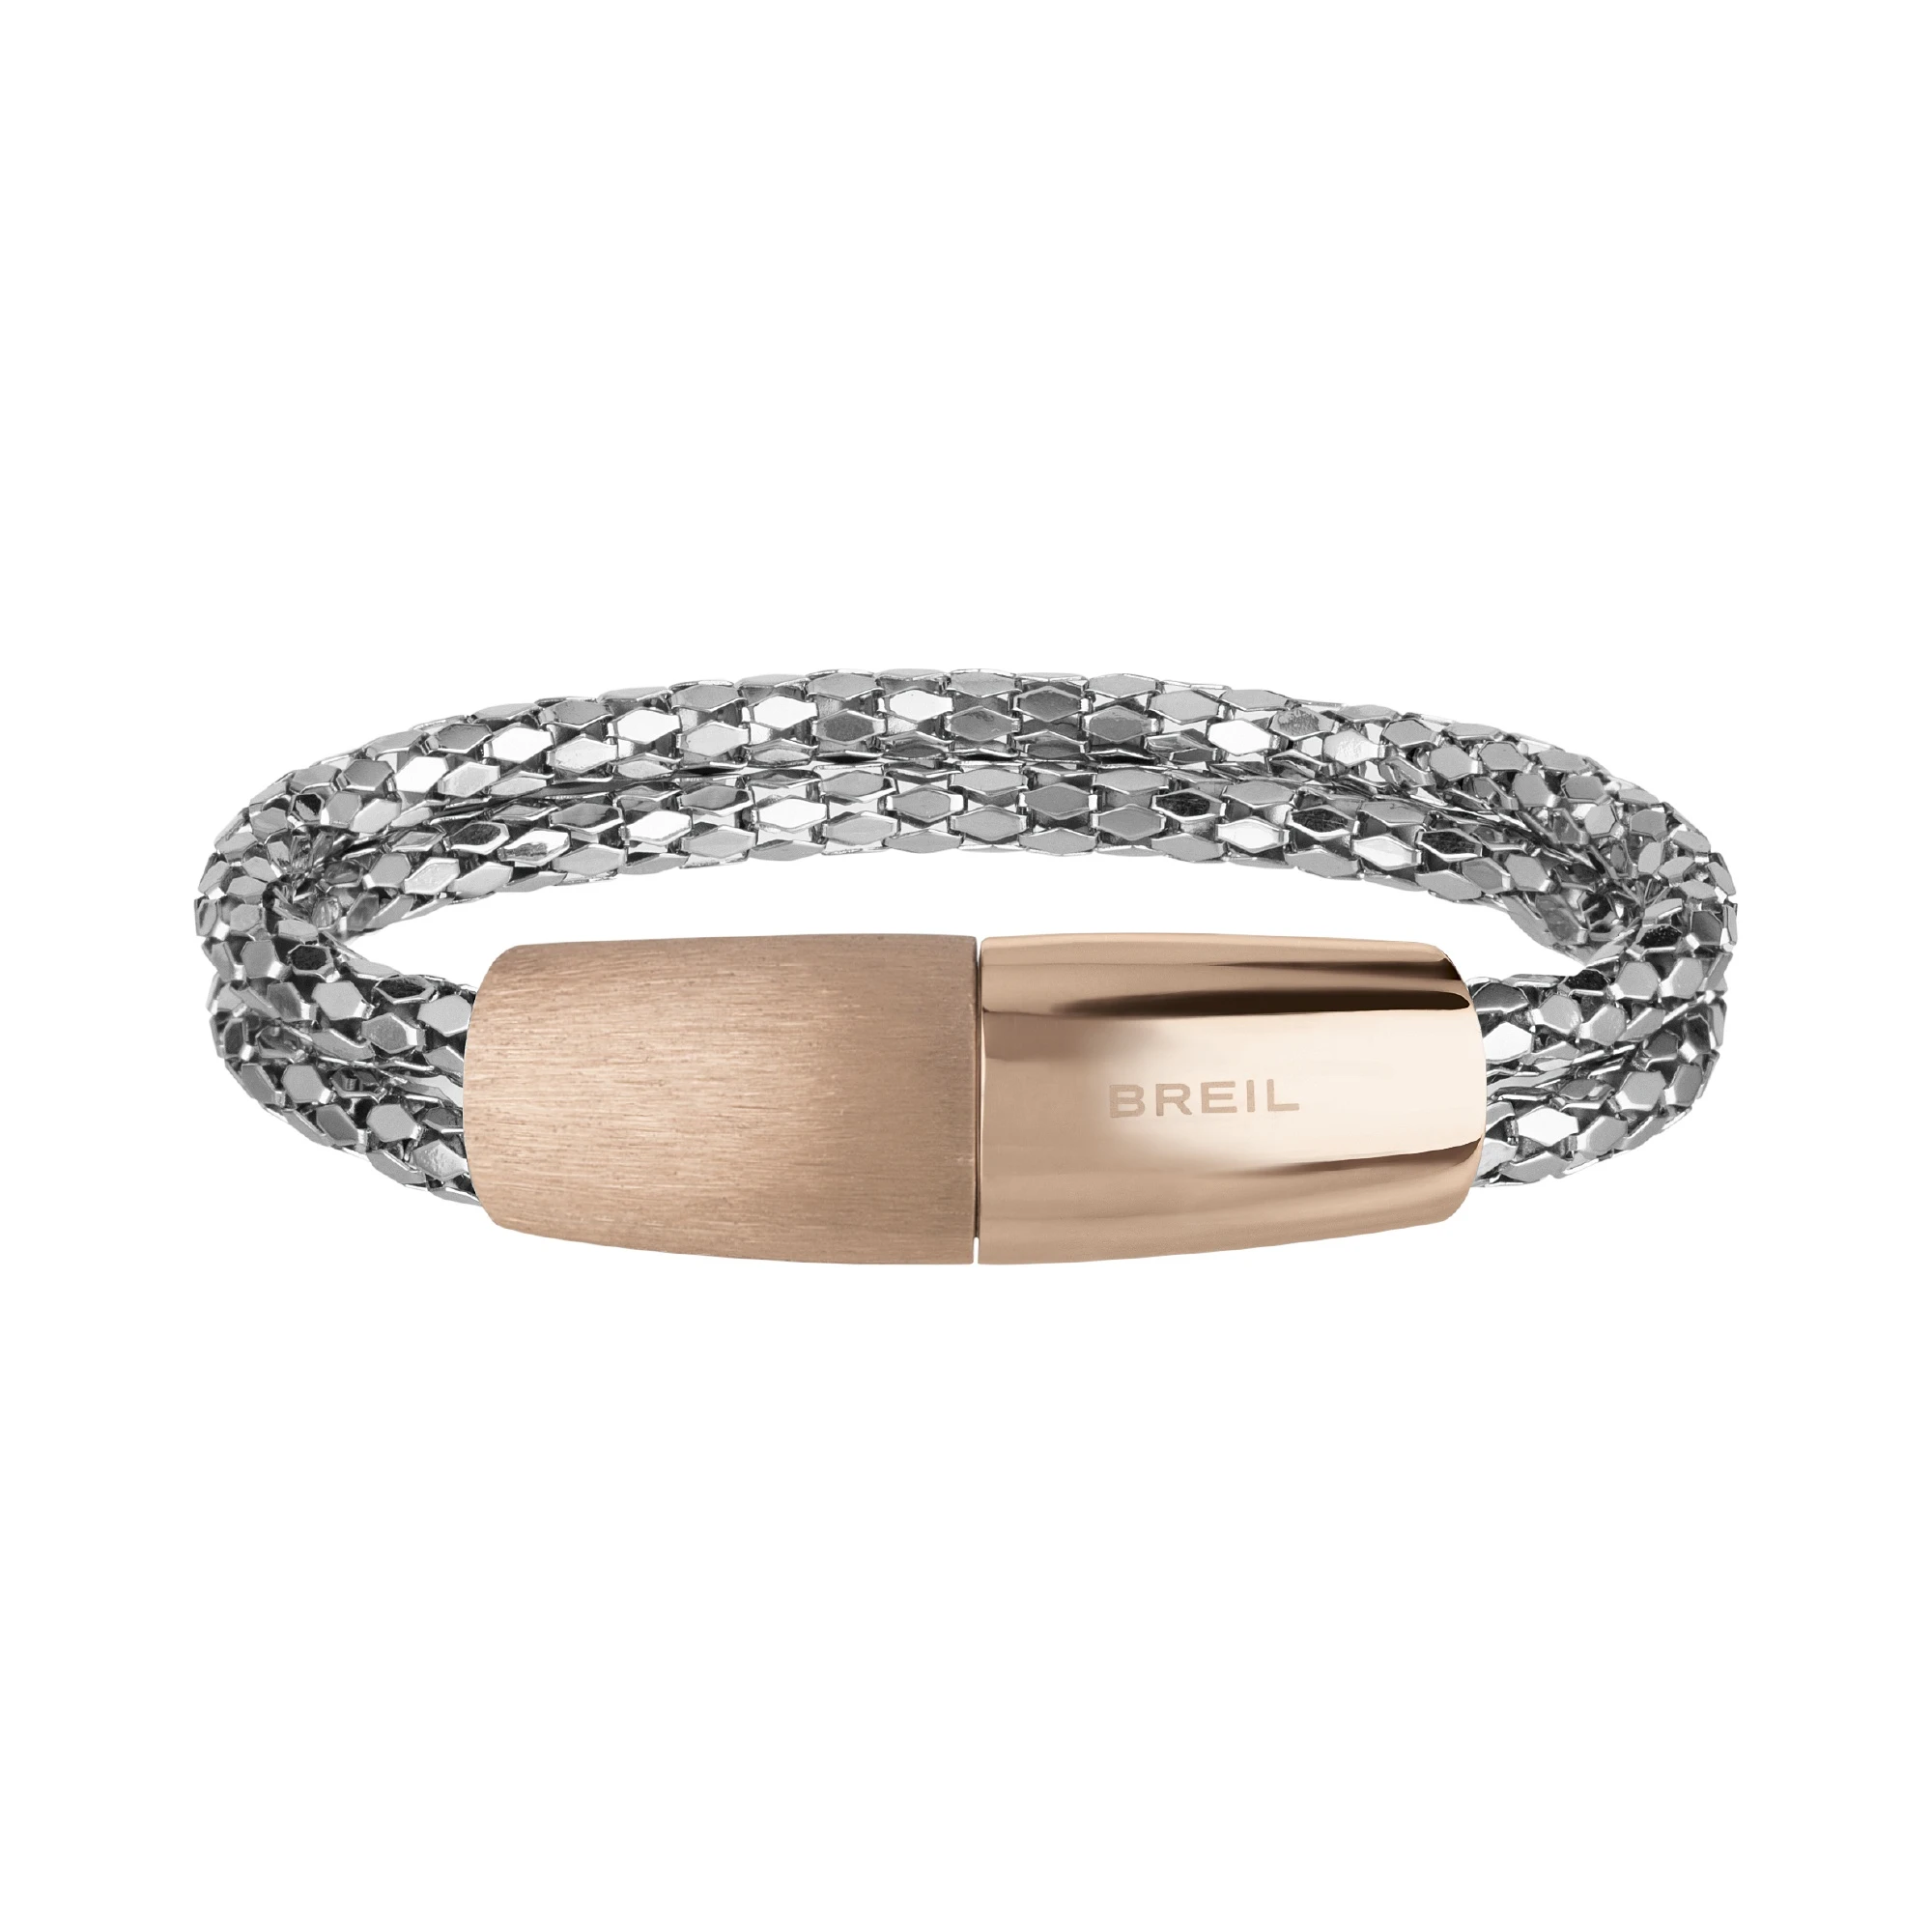 LIGHT - SHINY STAINLESS STEEL BRACELET WITH IP ROSE GOLD ELEMENTS - 1 - TJ2149_ | Breil